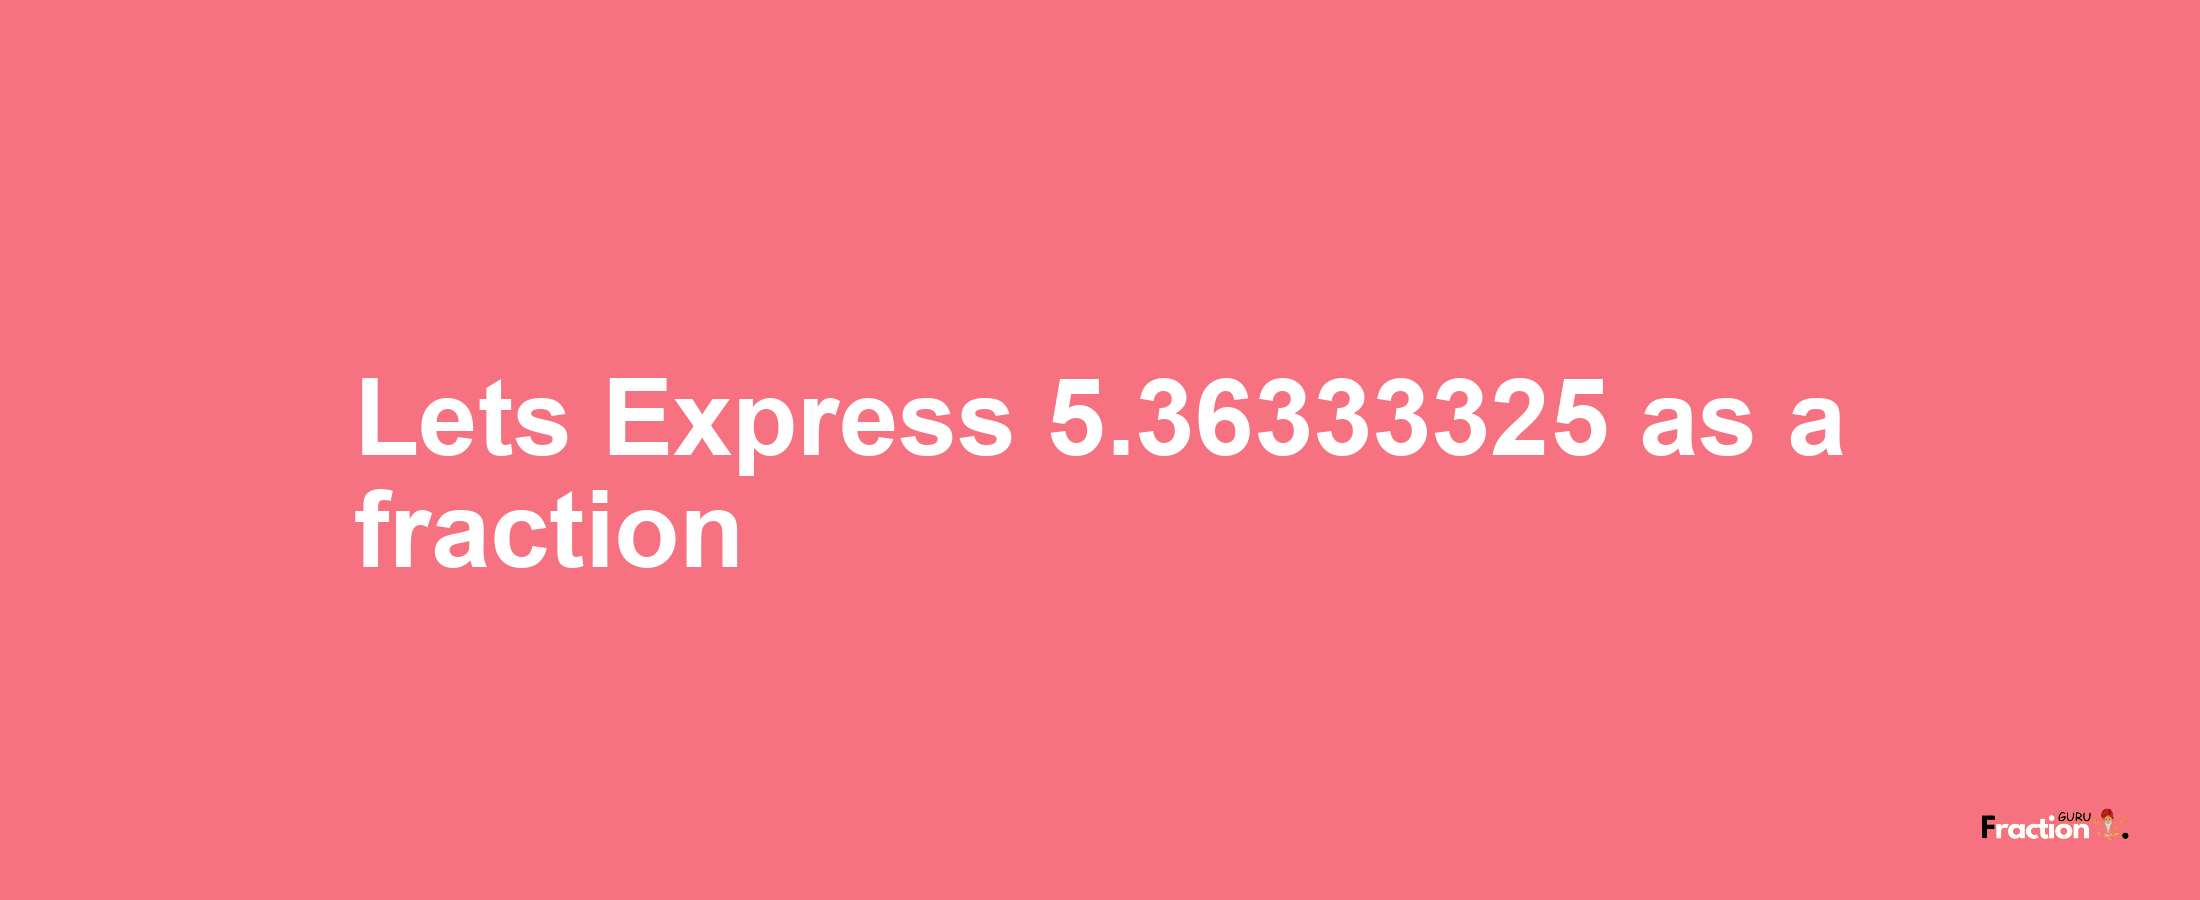 Lets Express 5.36333325 as afraction